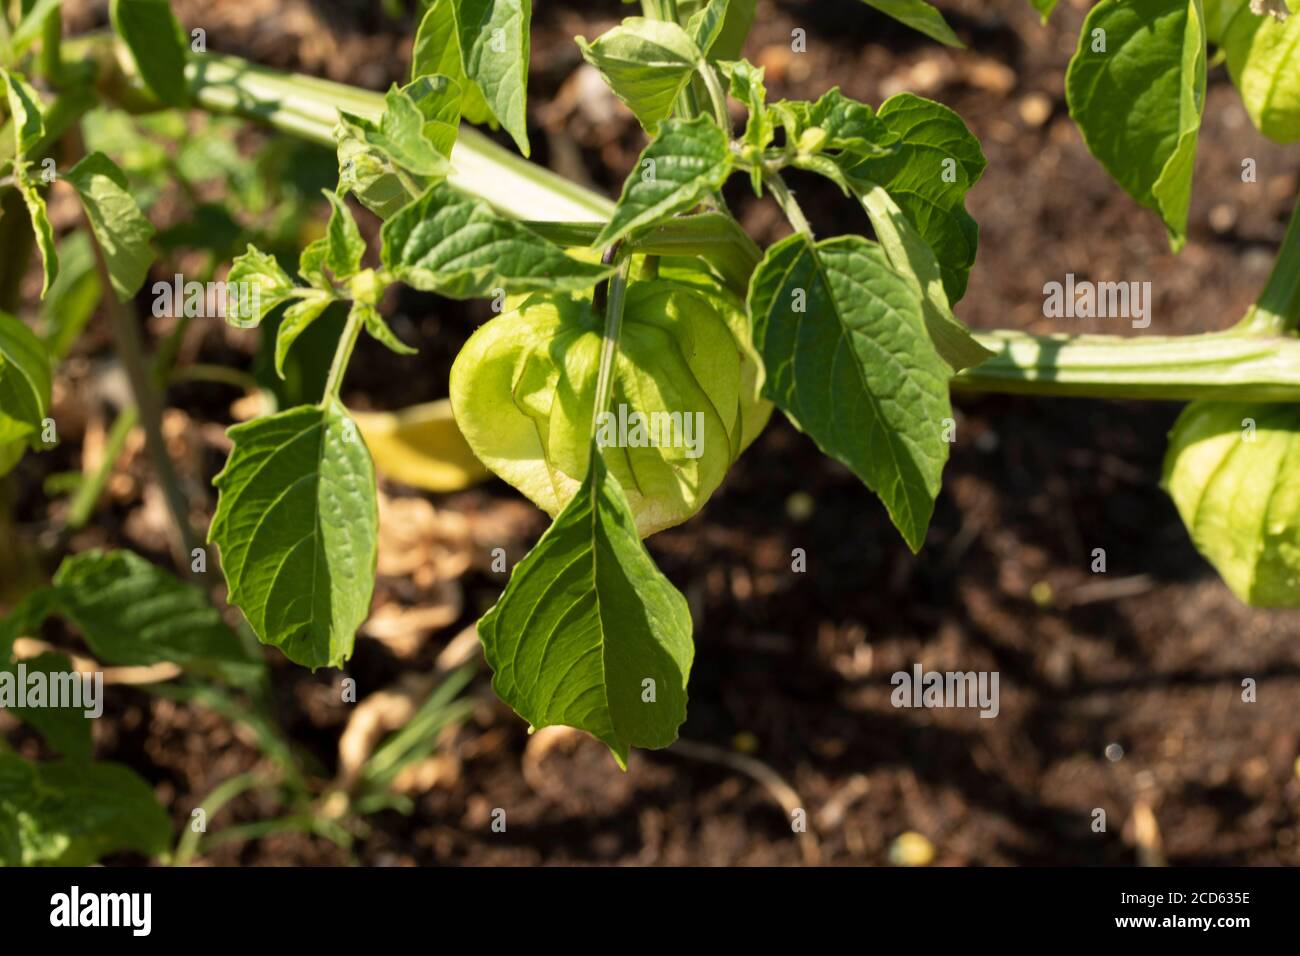 Tomatillo plant and fruit in a garden setting, food ingredient Stock Photo